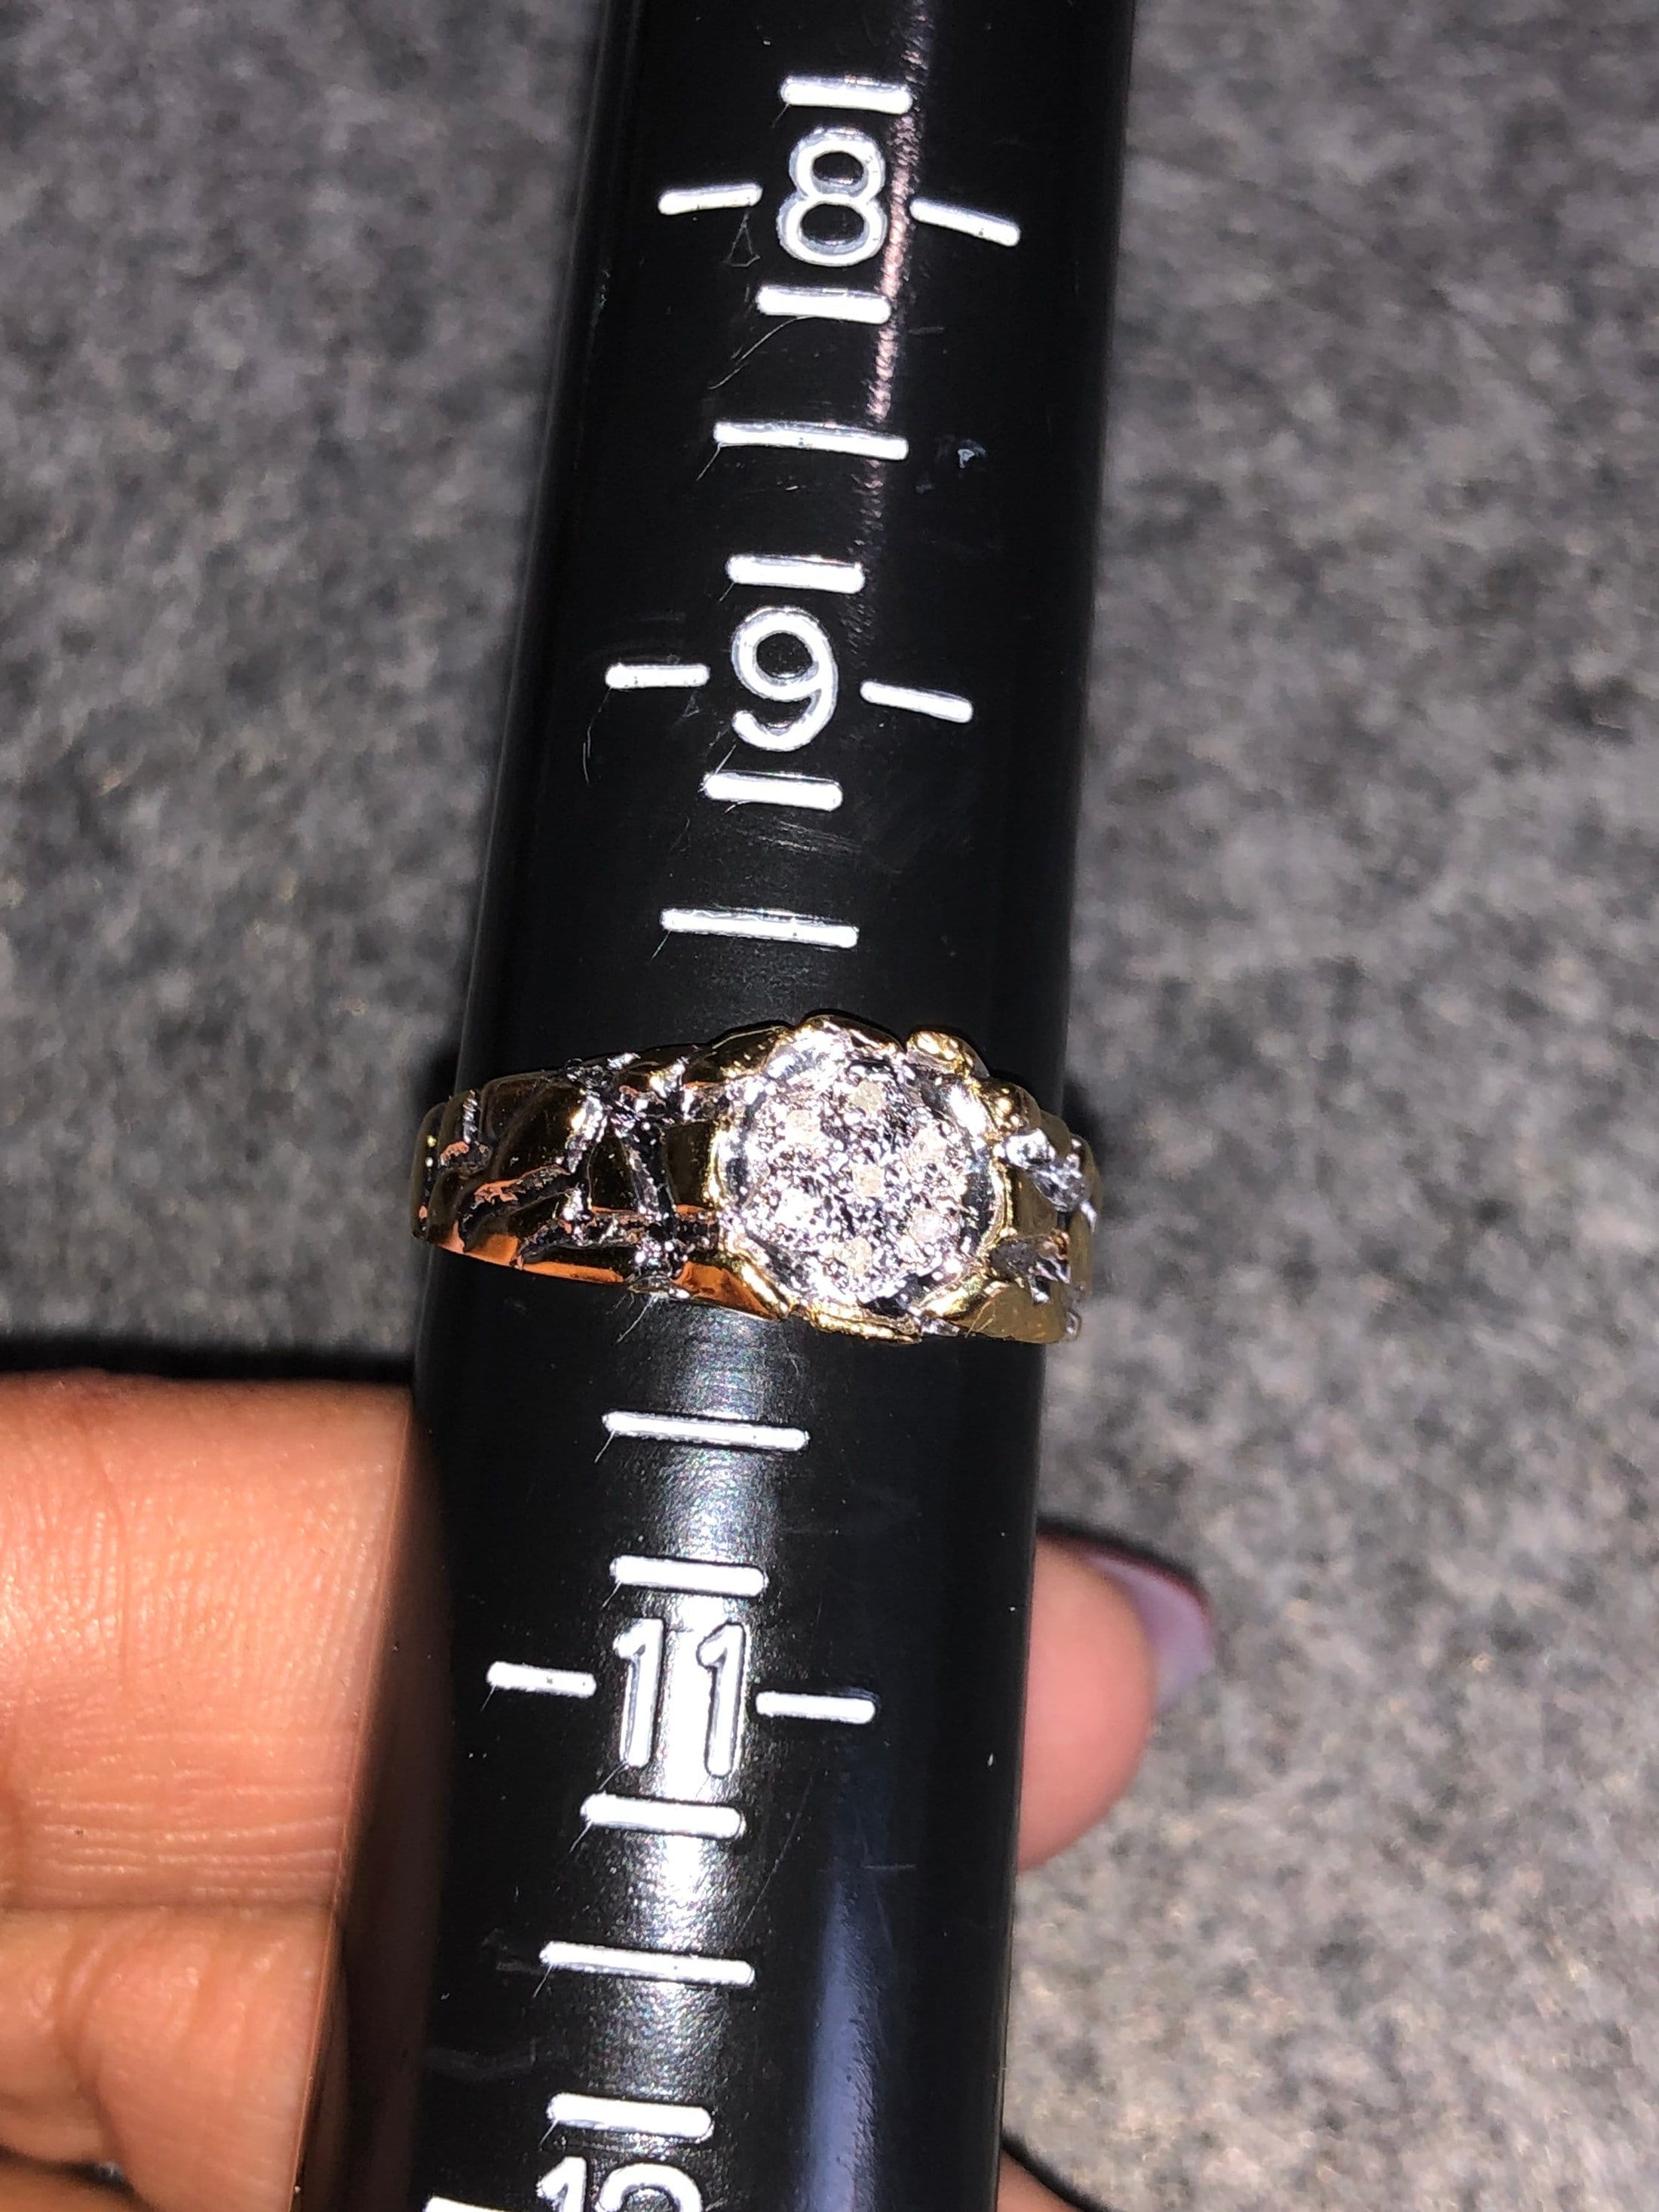 Men’s Real Diamond Ring! Huge Sale! Comes with certificate of authenticity. Not CZ not fake!